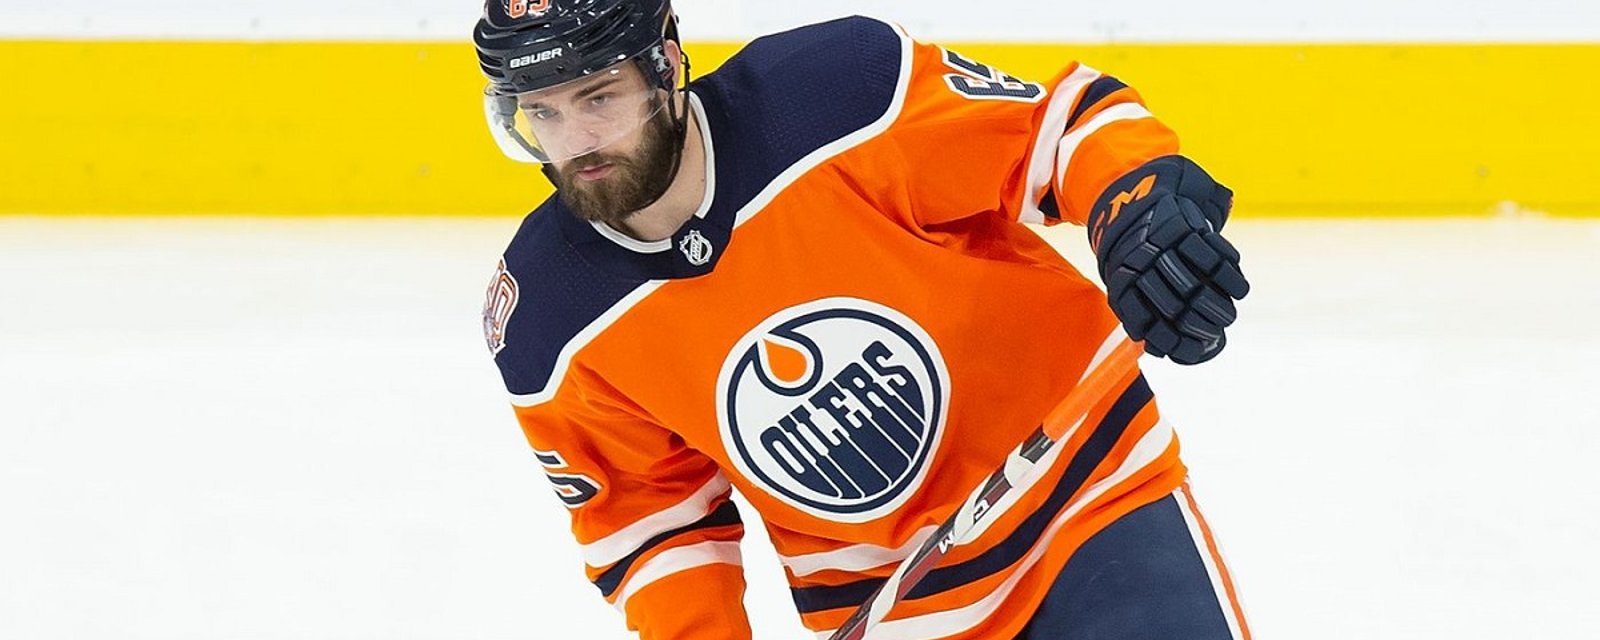 Oilers sign Cooper Marody to a new deal.